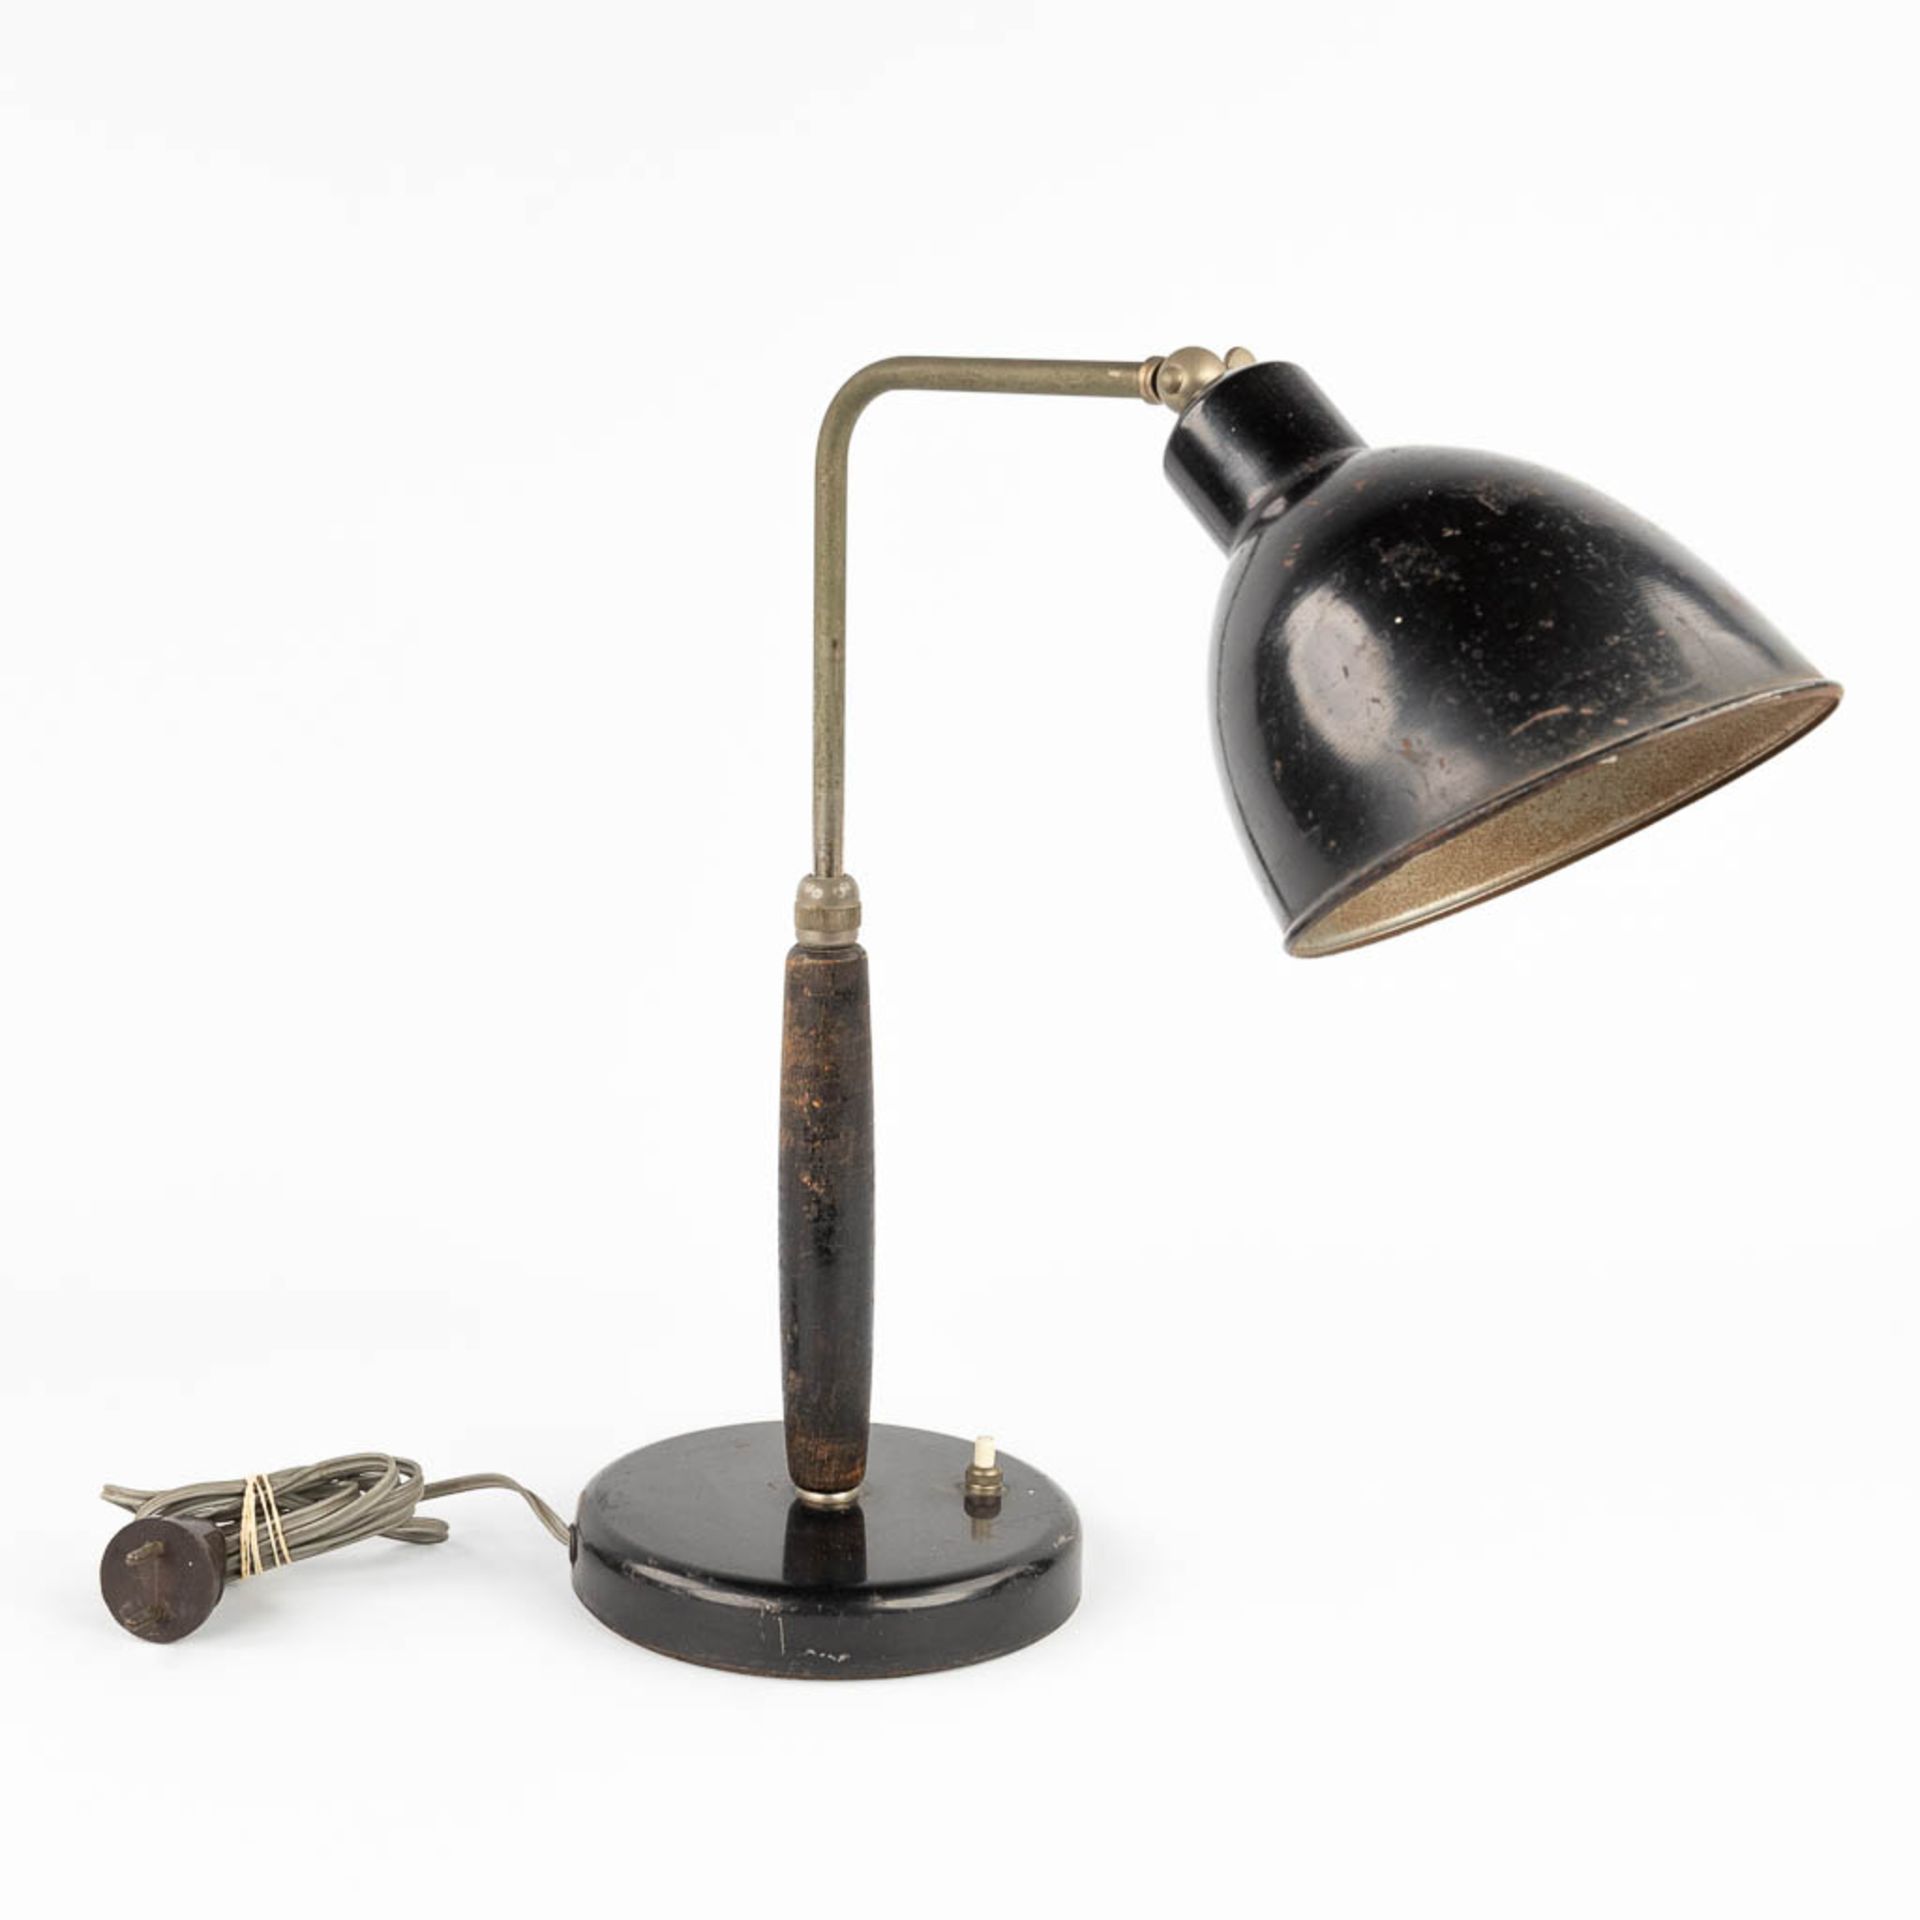 Christian DELL (1893-1974) 'Table lamp' made of metal and wood. (H:37 x D:16 cm) - Image 3 of 12